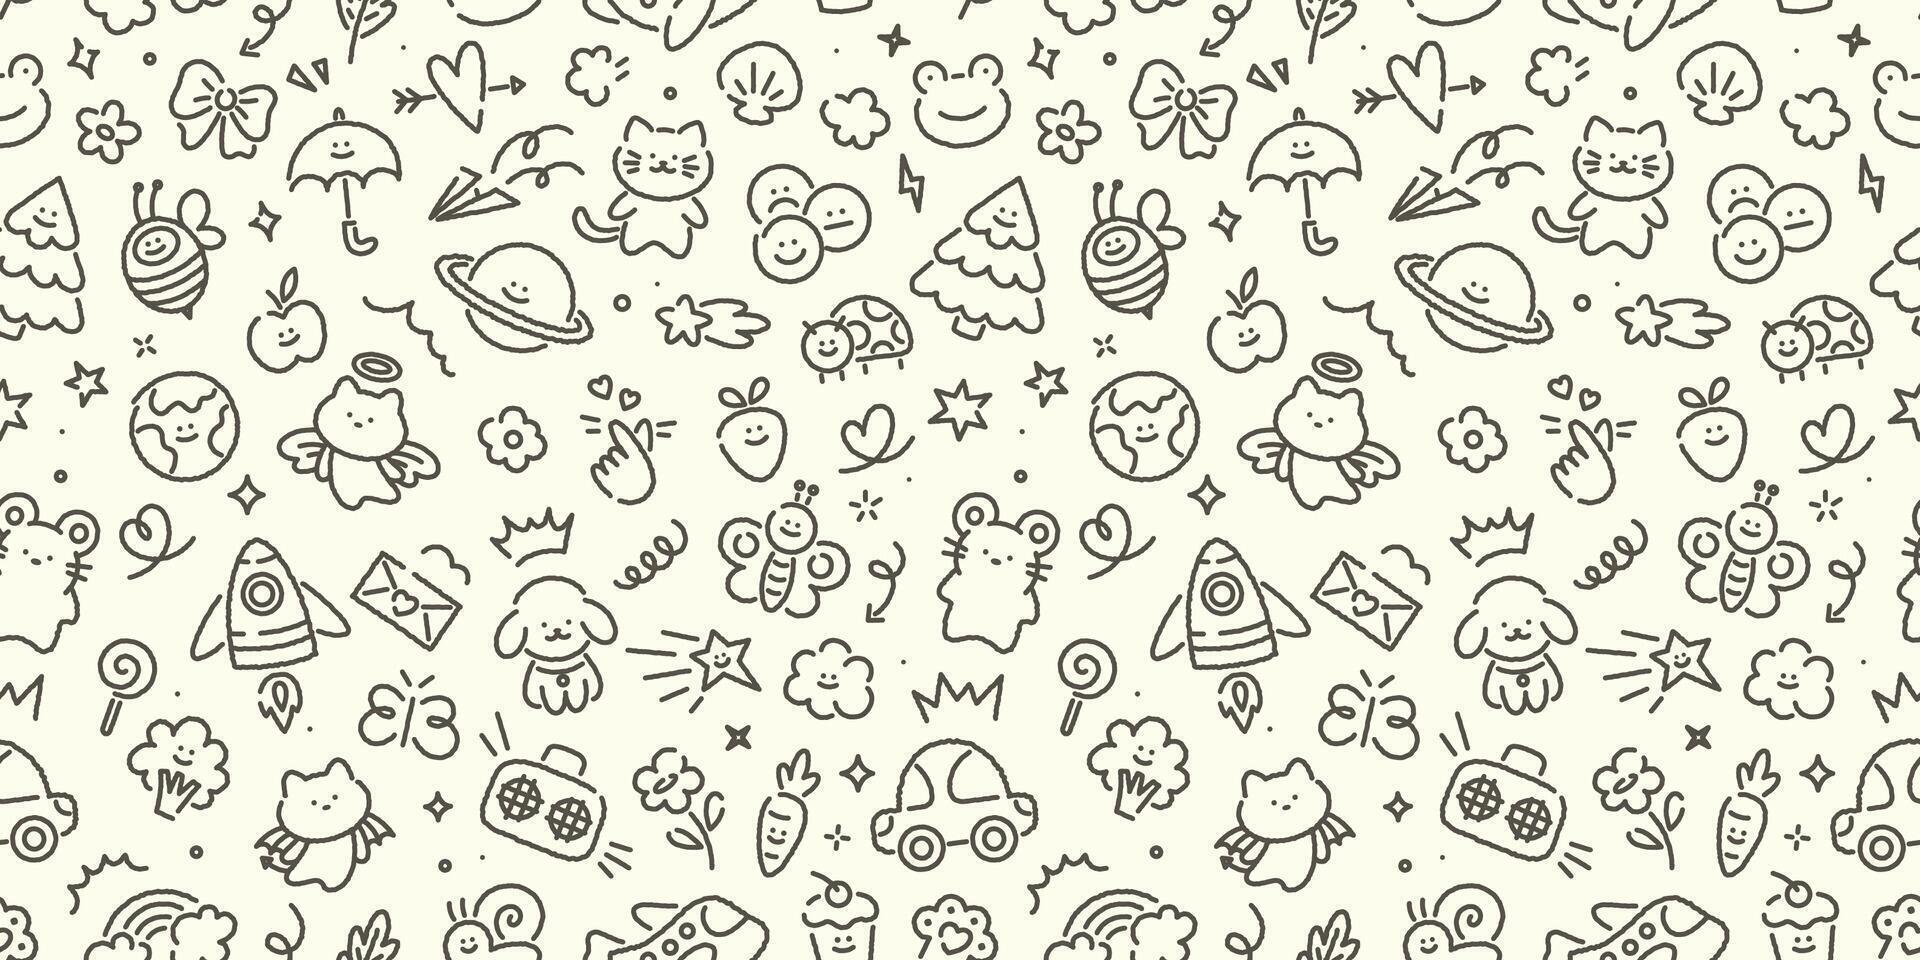 Seamless hand drawn kid doodle pattern. Cute scribble set of sun, flower, smile, heart, animal, cloud, star, rainbow, fruit. Vector trendy sketch childish elements for stickers, patterns, banners